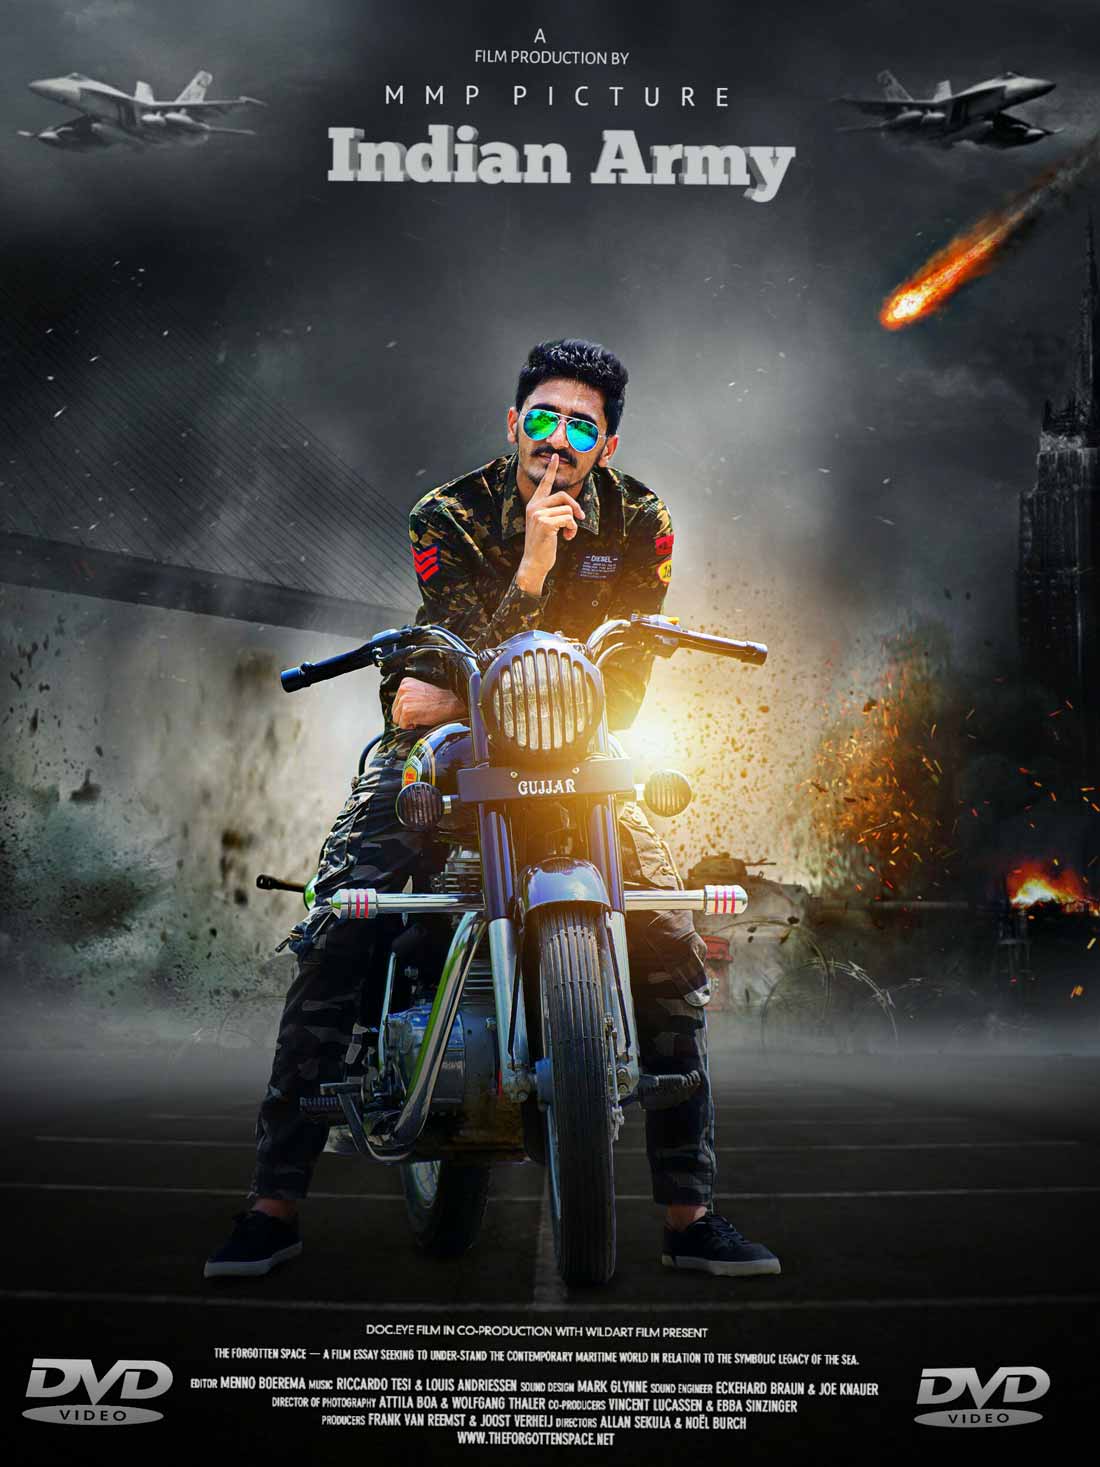 Indian Army Action Movie Poster Photo Manipulation